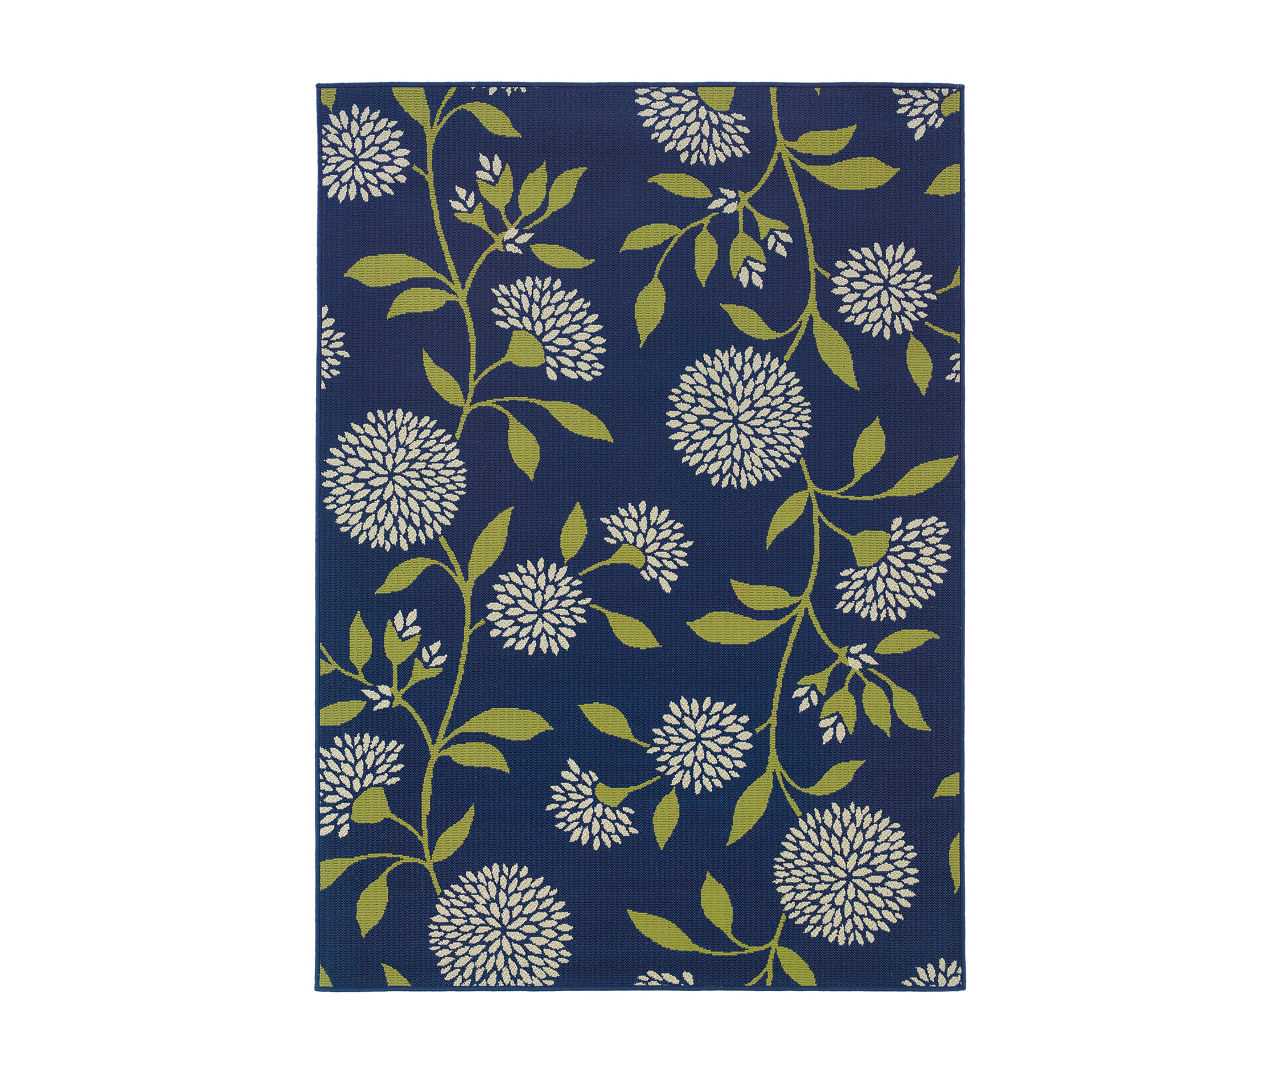 Heather Floral Outdoor Area Rug, (5'3" x 7'6")